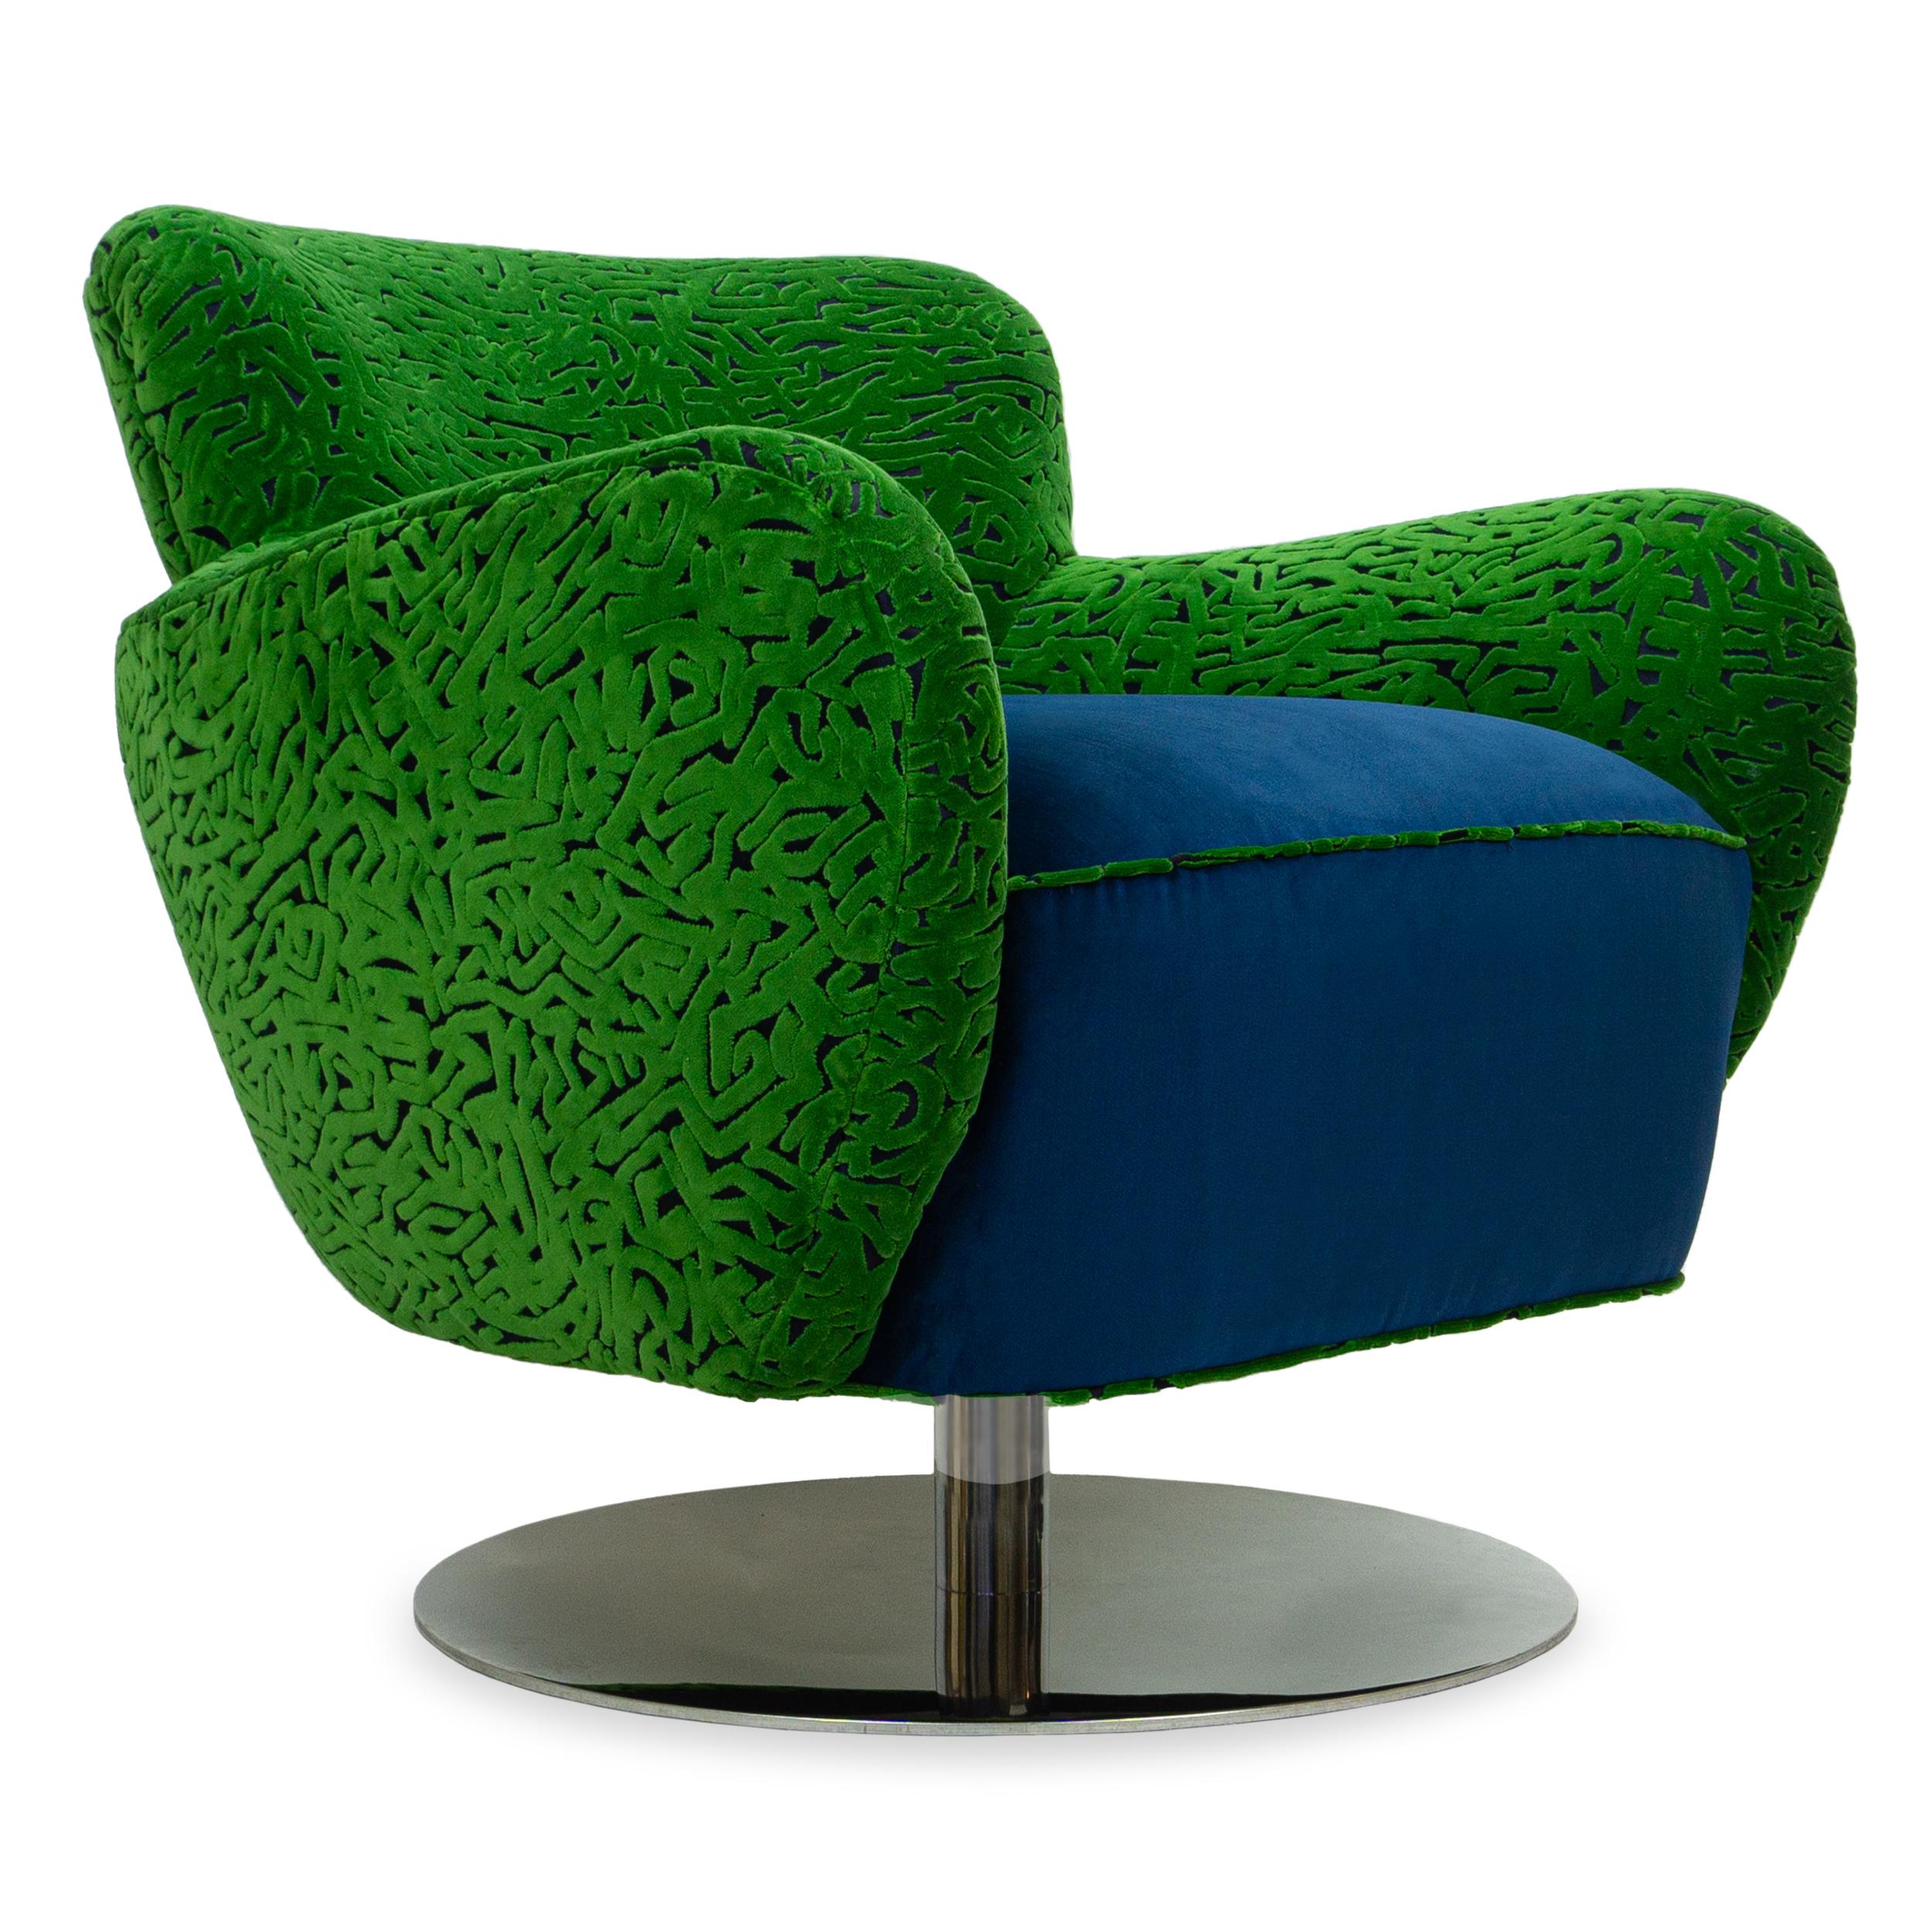 Retro style swivel chair with mirrored / chrome base (we can also spray it black). Frame is made with solid hardwood and upholstered with eight-way hand-tied springs and high density foam. Features swirly grass green cut velvet on frame and